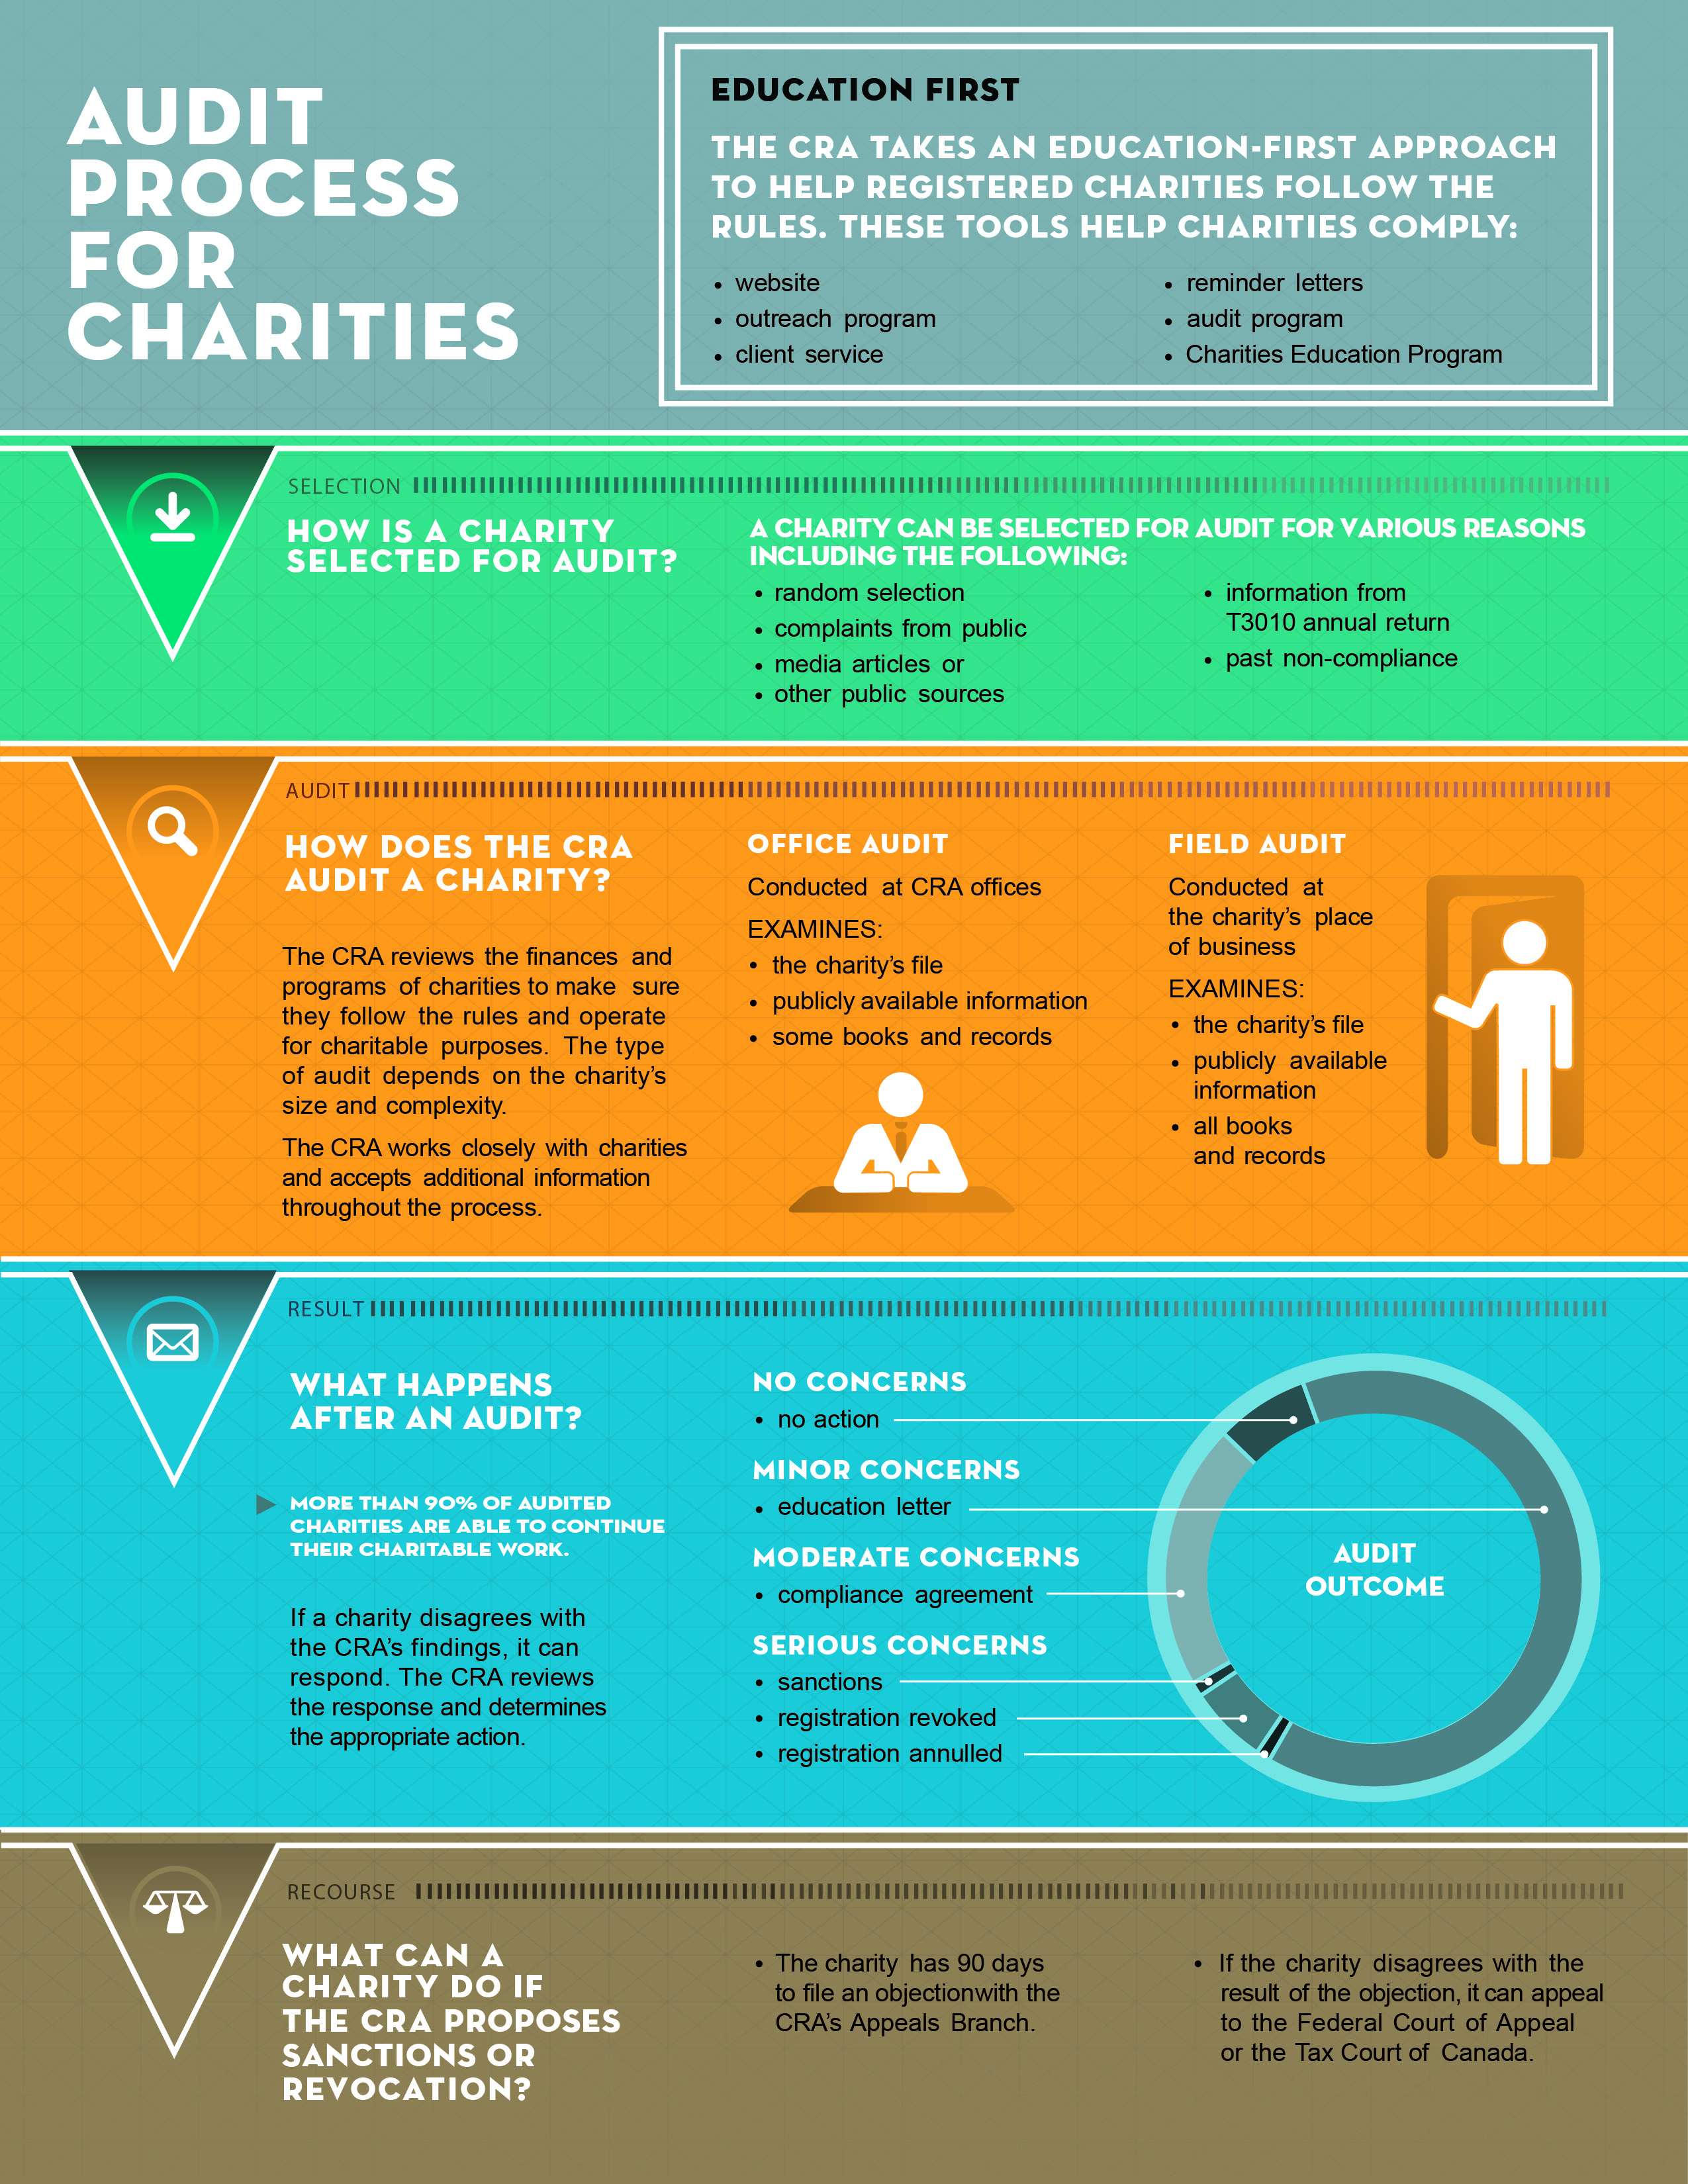 Audit process for charities